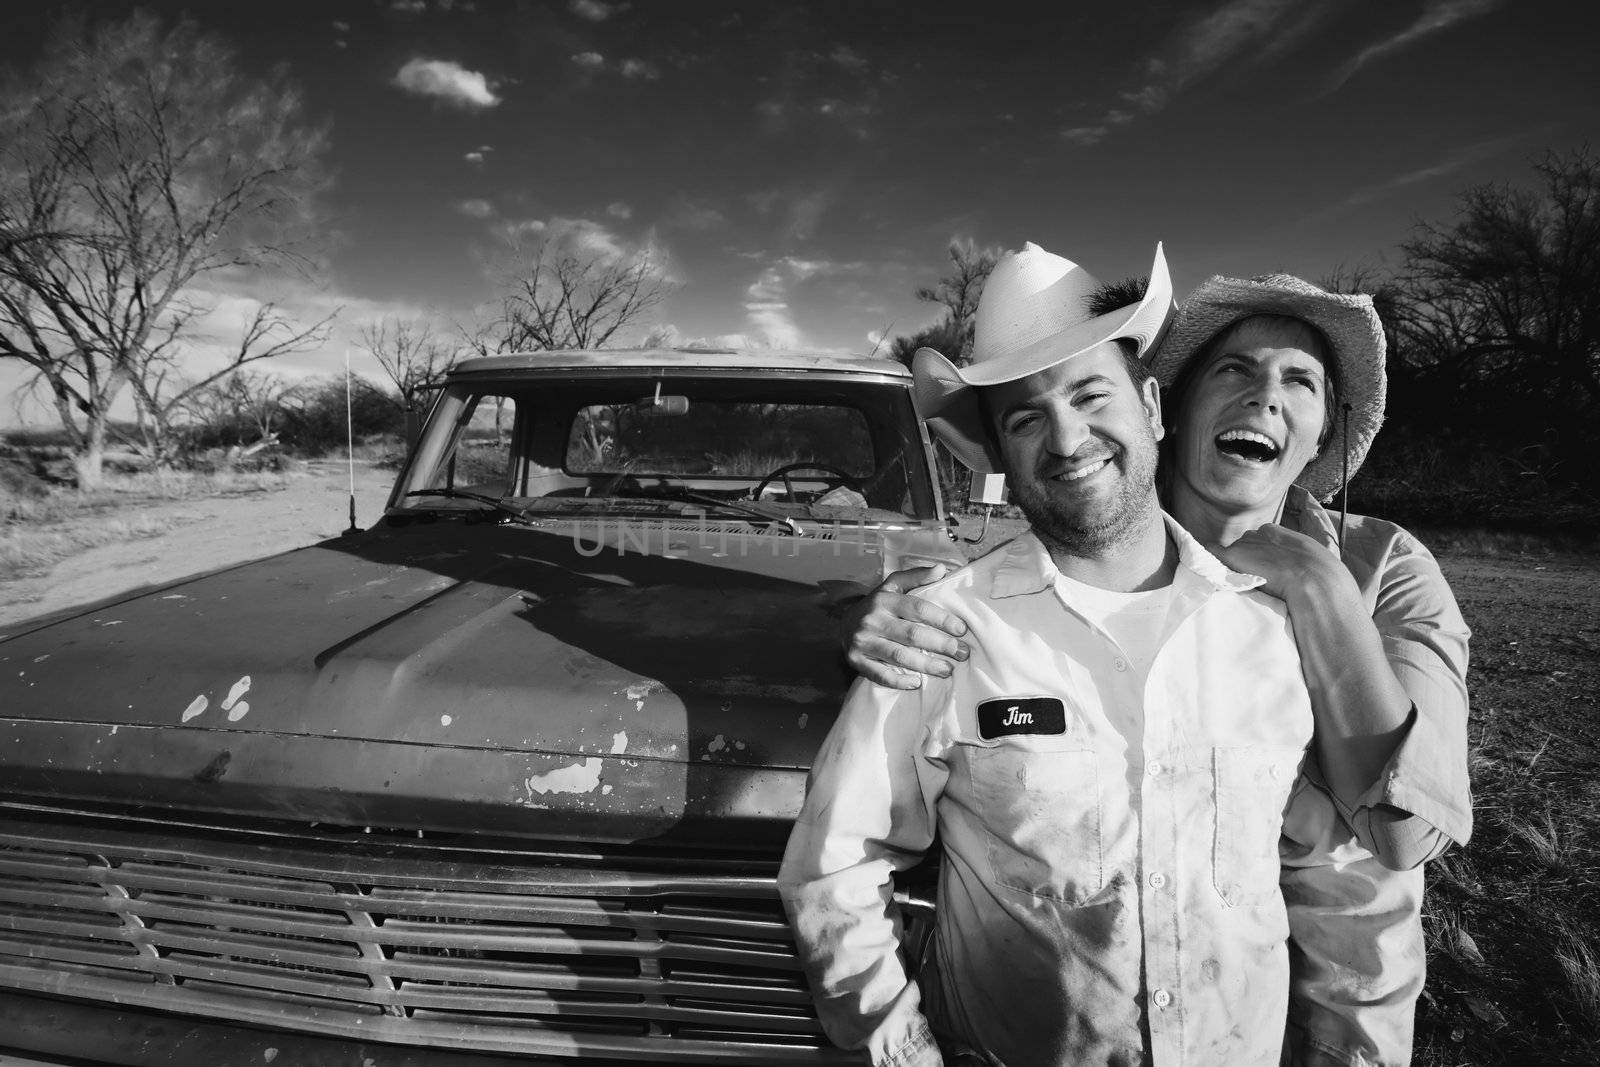 Man and woman in cowboy hats with old truck